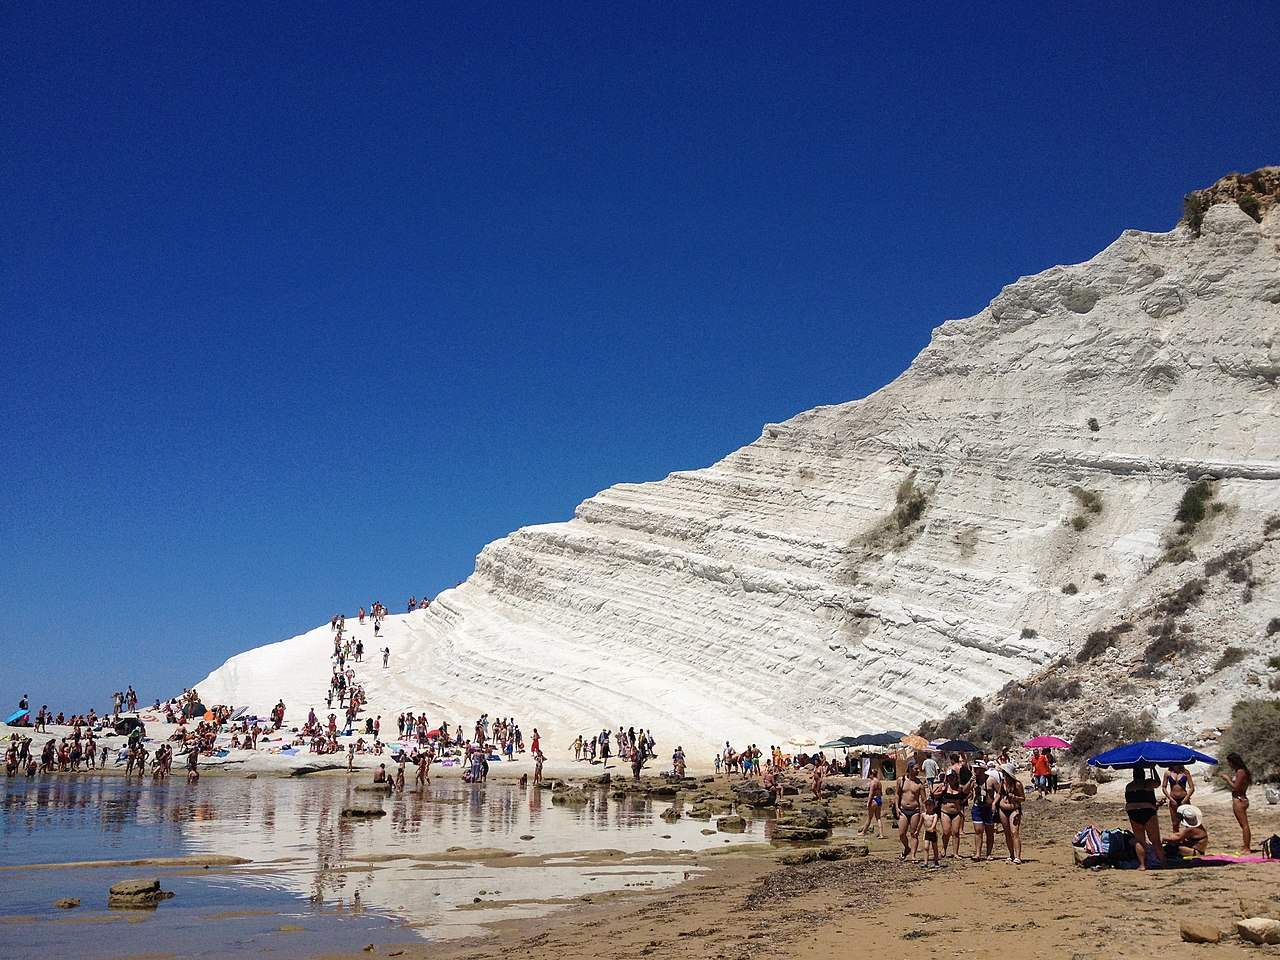 Photos at the Scala dei Turchi? Image rights could end up with a private individual. It's a controversy